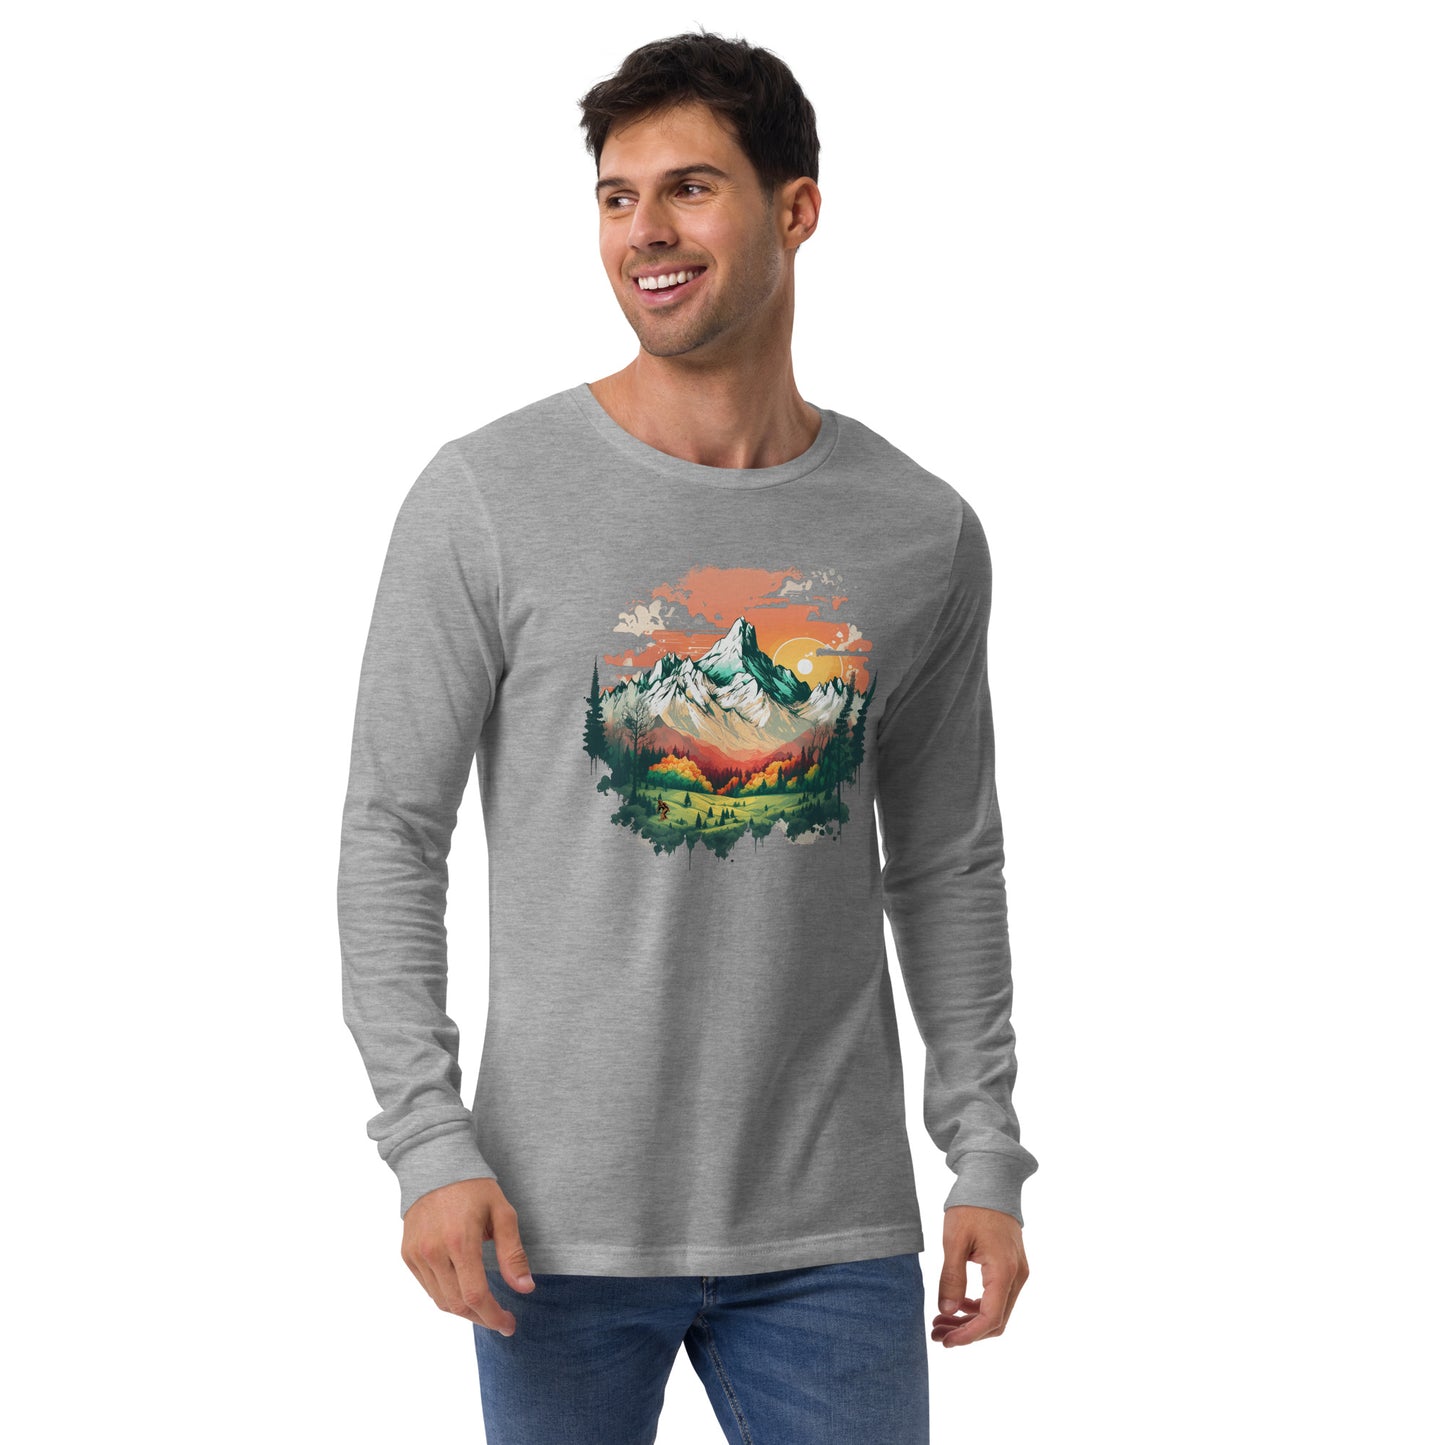 The Great Outdoors Unisex Long Sleeve Shirt